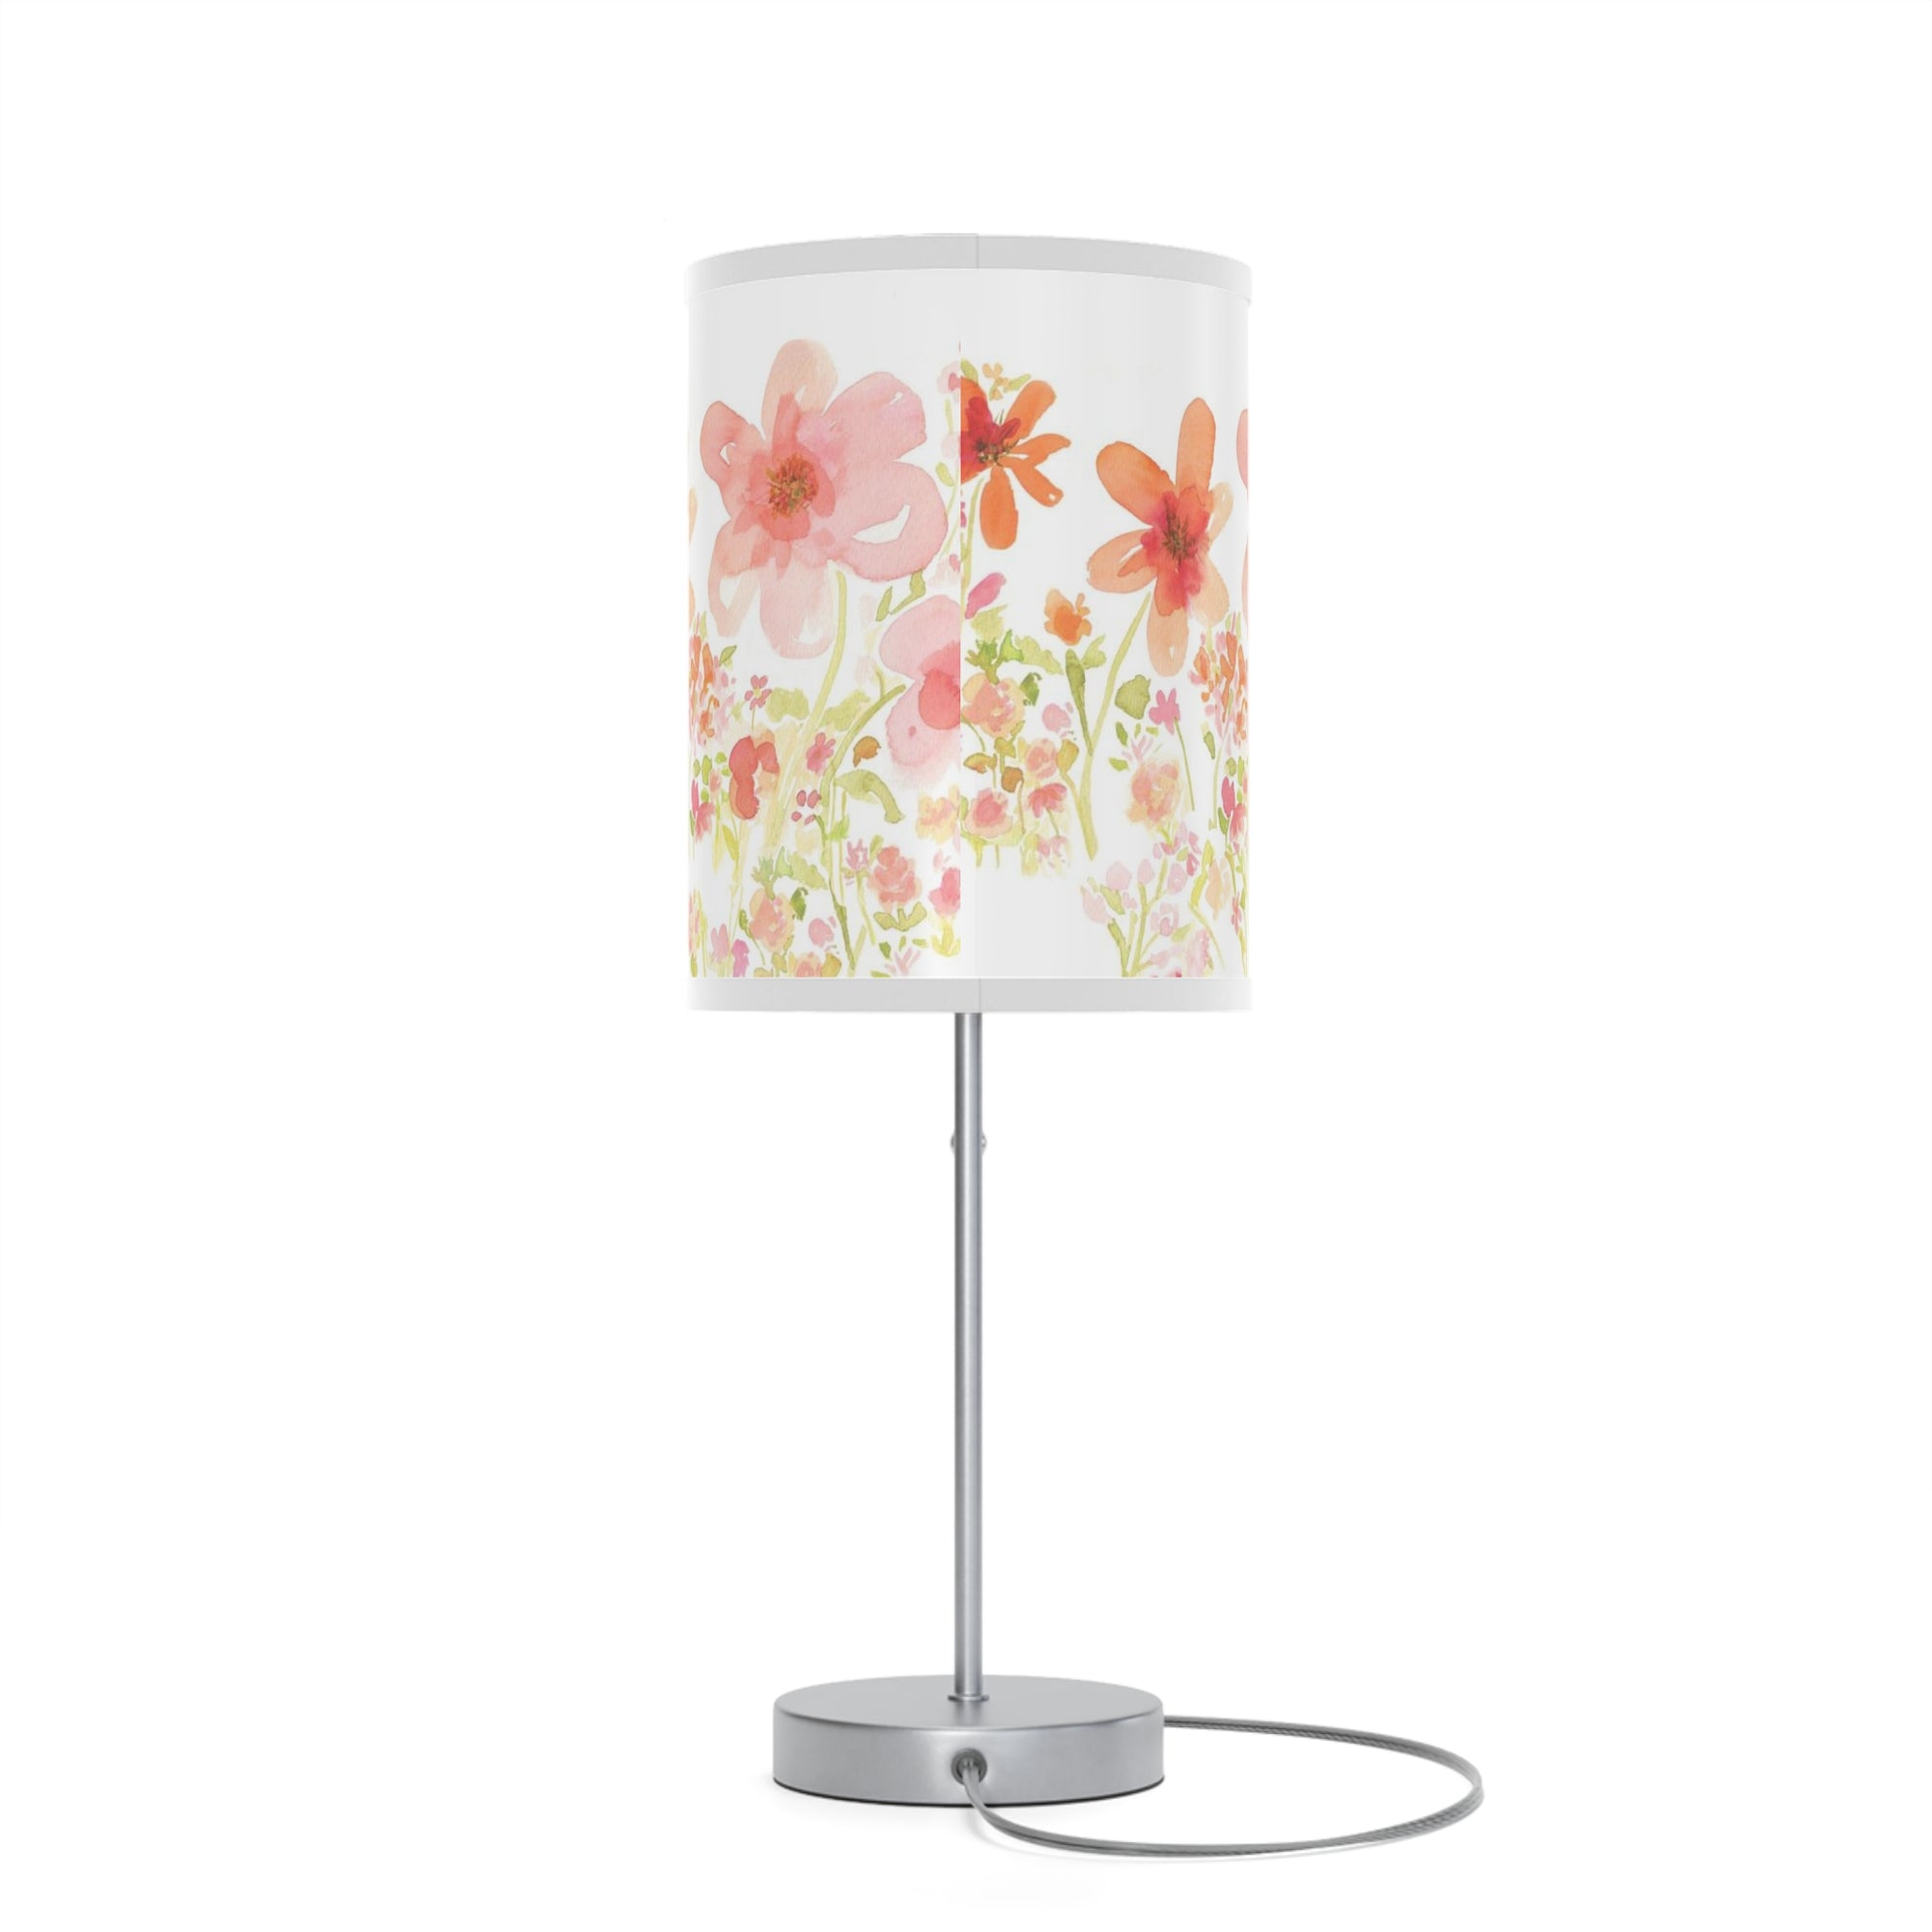 Orange Floral Lamp on a Stand | Flower Fields Lamp